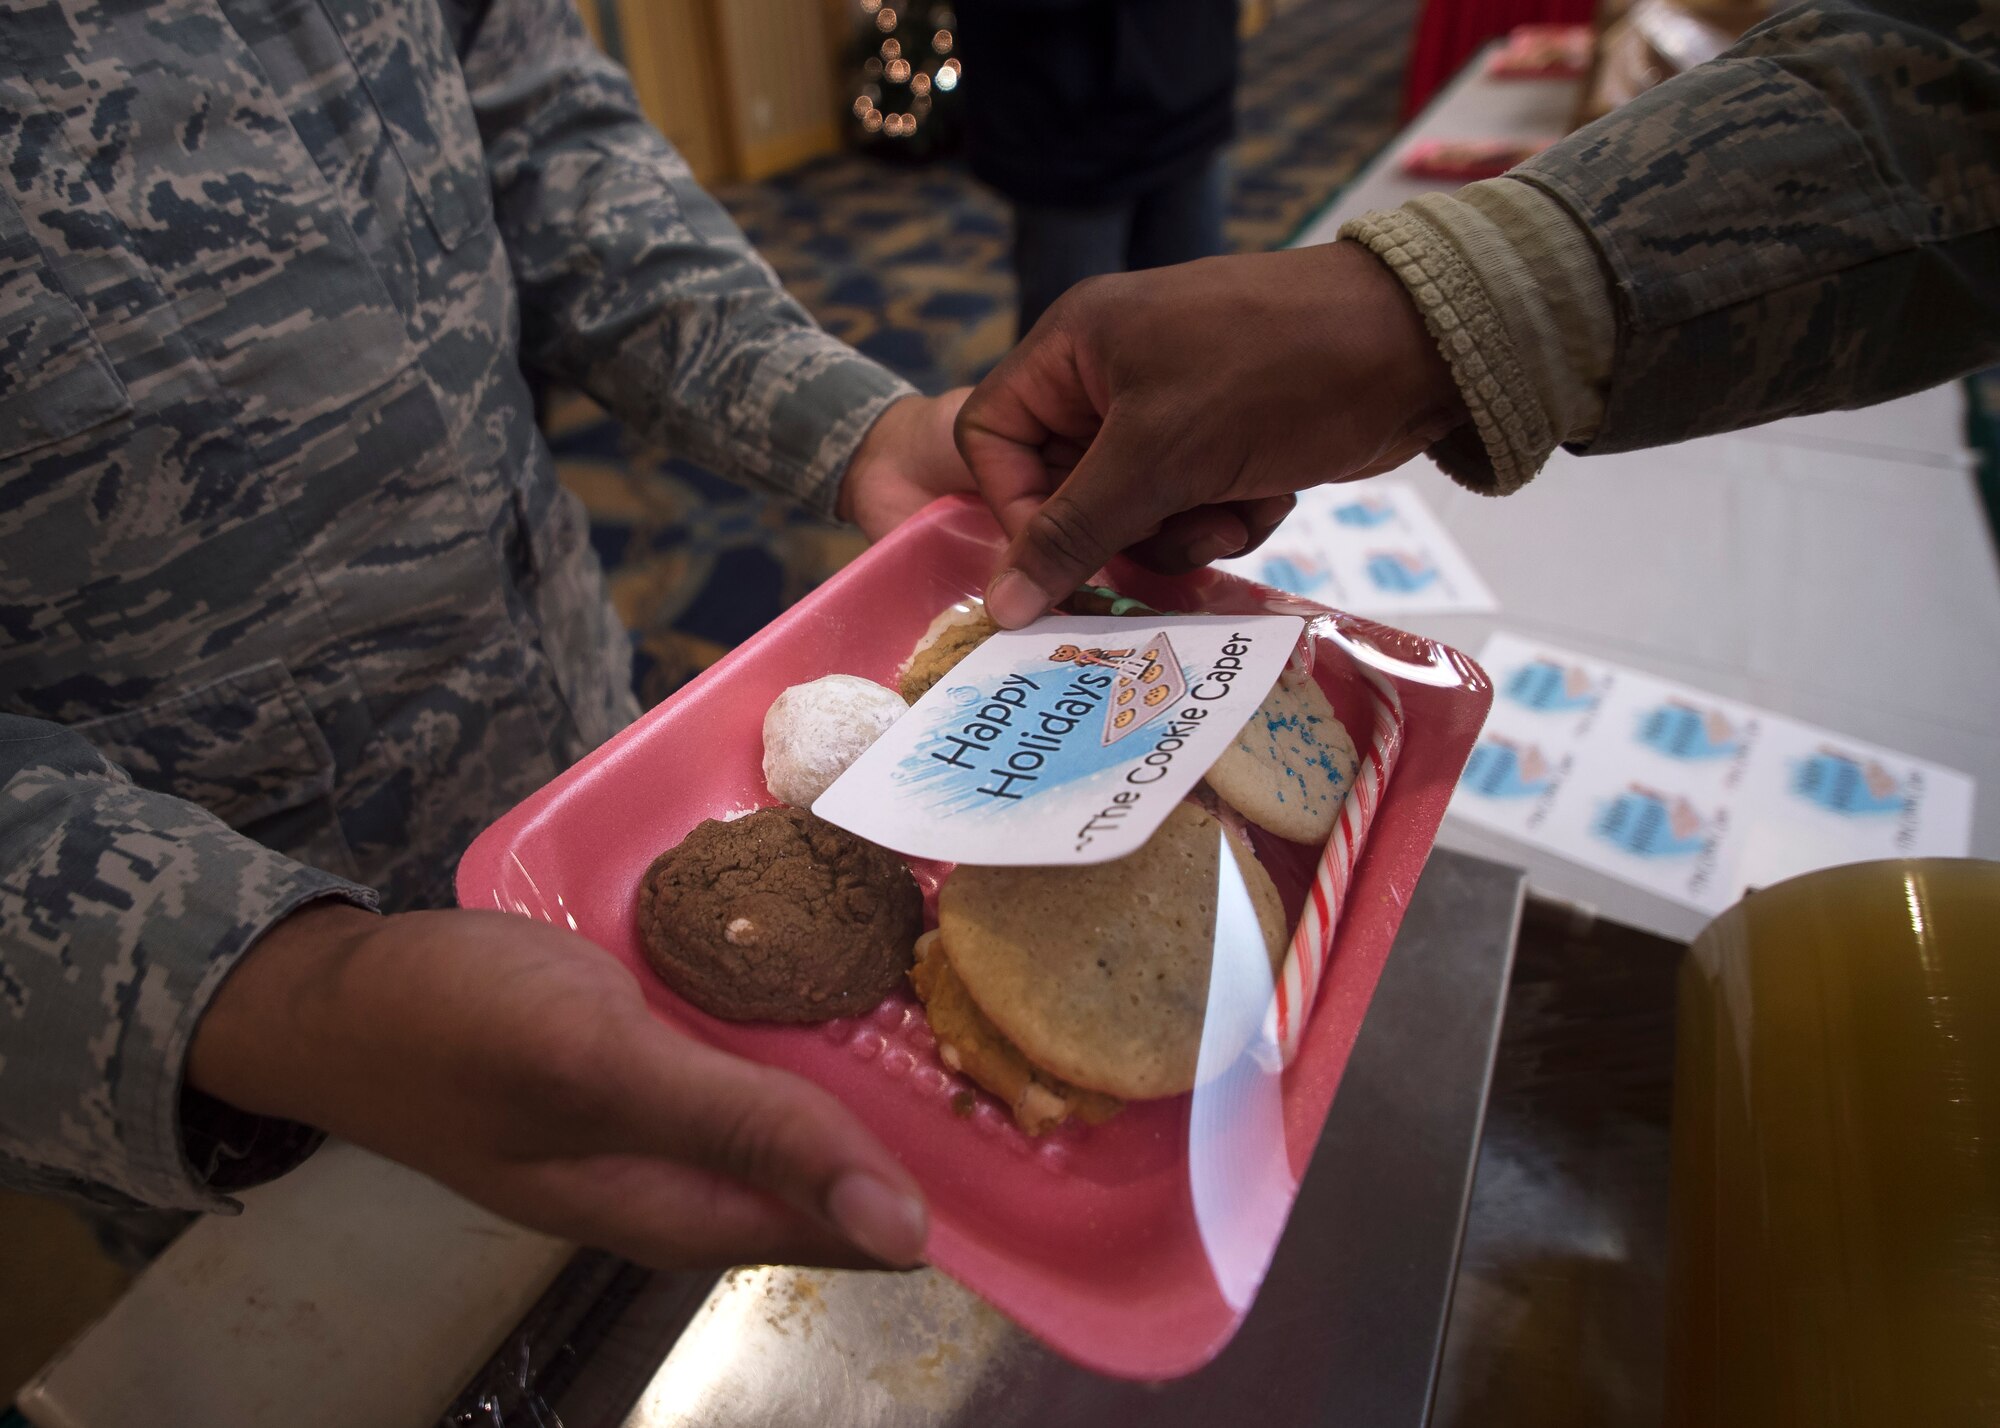 U.S. Air Force Airmen package cookies for delivery during the annual Cookie Caper event at Misawa Air Base, Japan, Dec. 7, 2016. After the cookies are divided and packaged, first sergeants and other leadership across the base hand delivered them to their units.  (U.S. Air Force photo by Senior Airman Deana Heitzman)